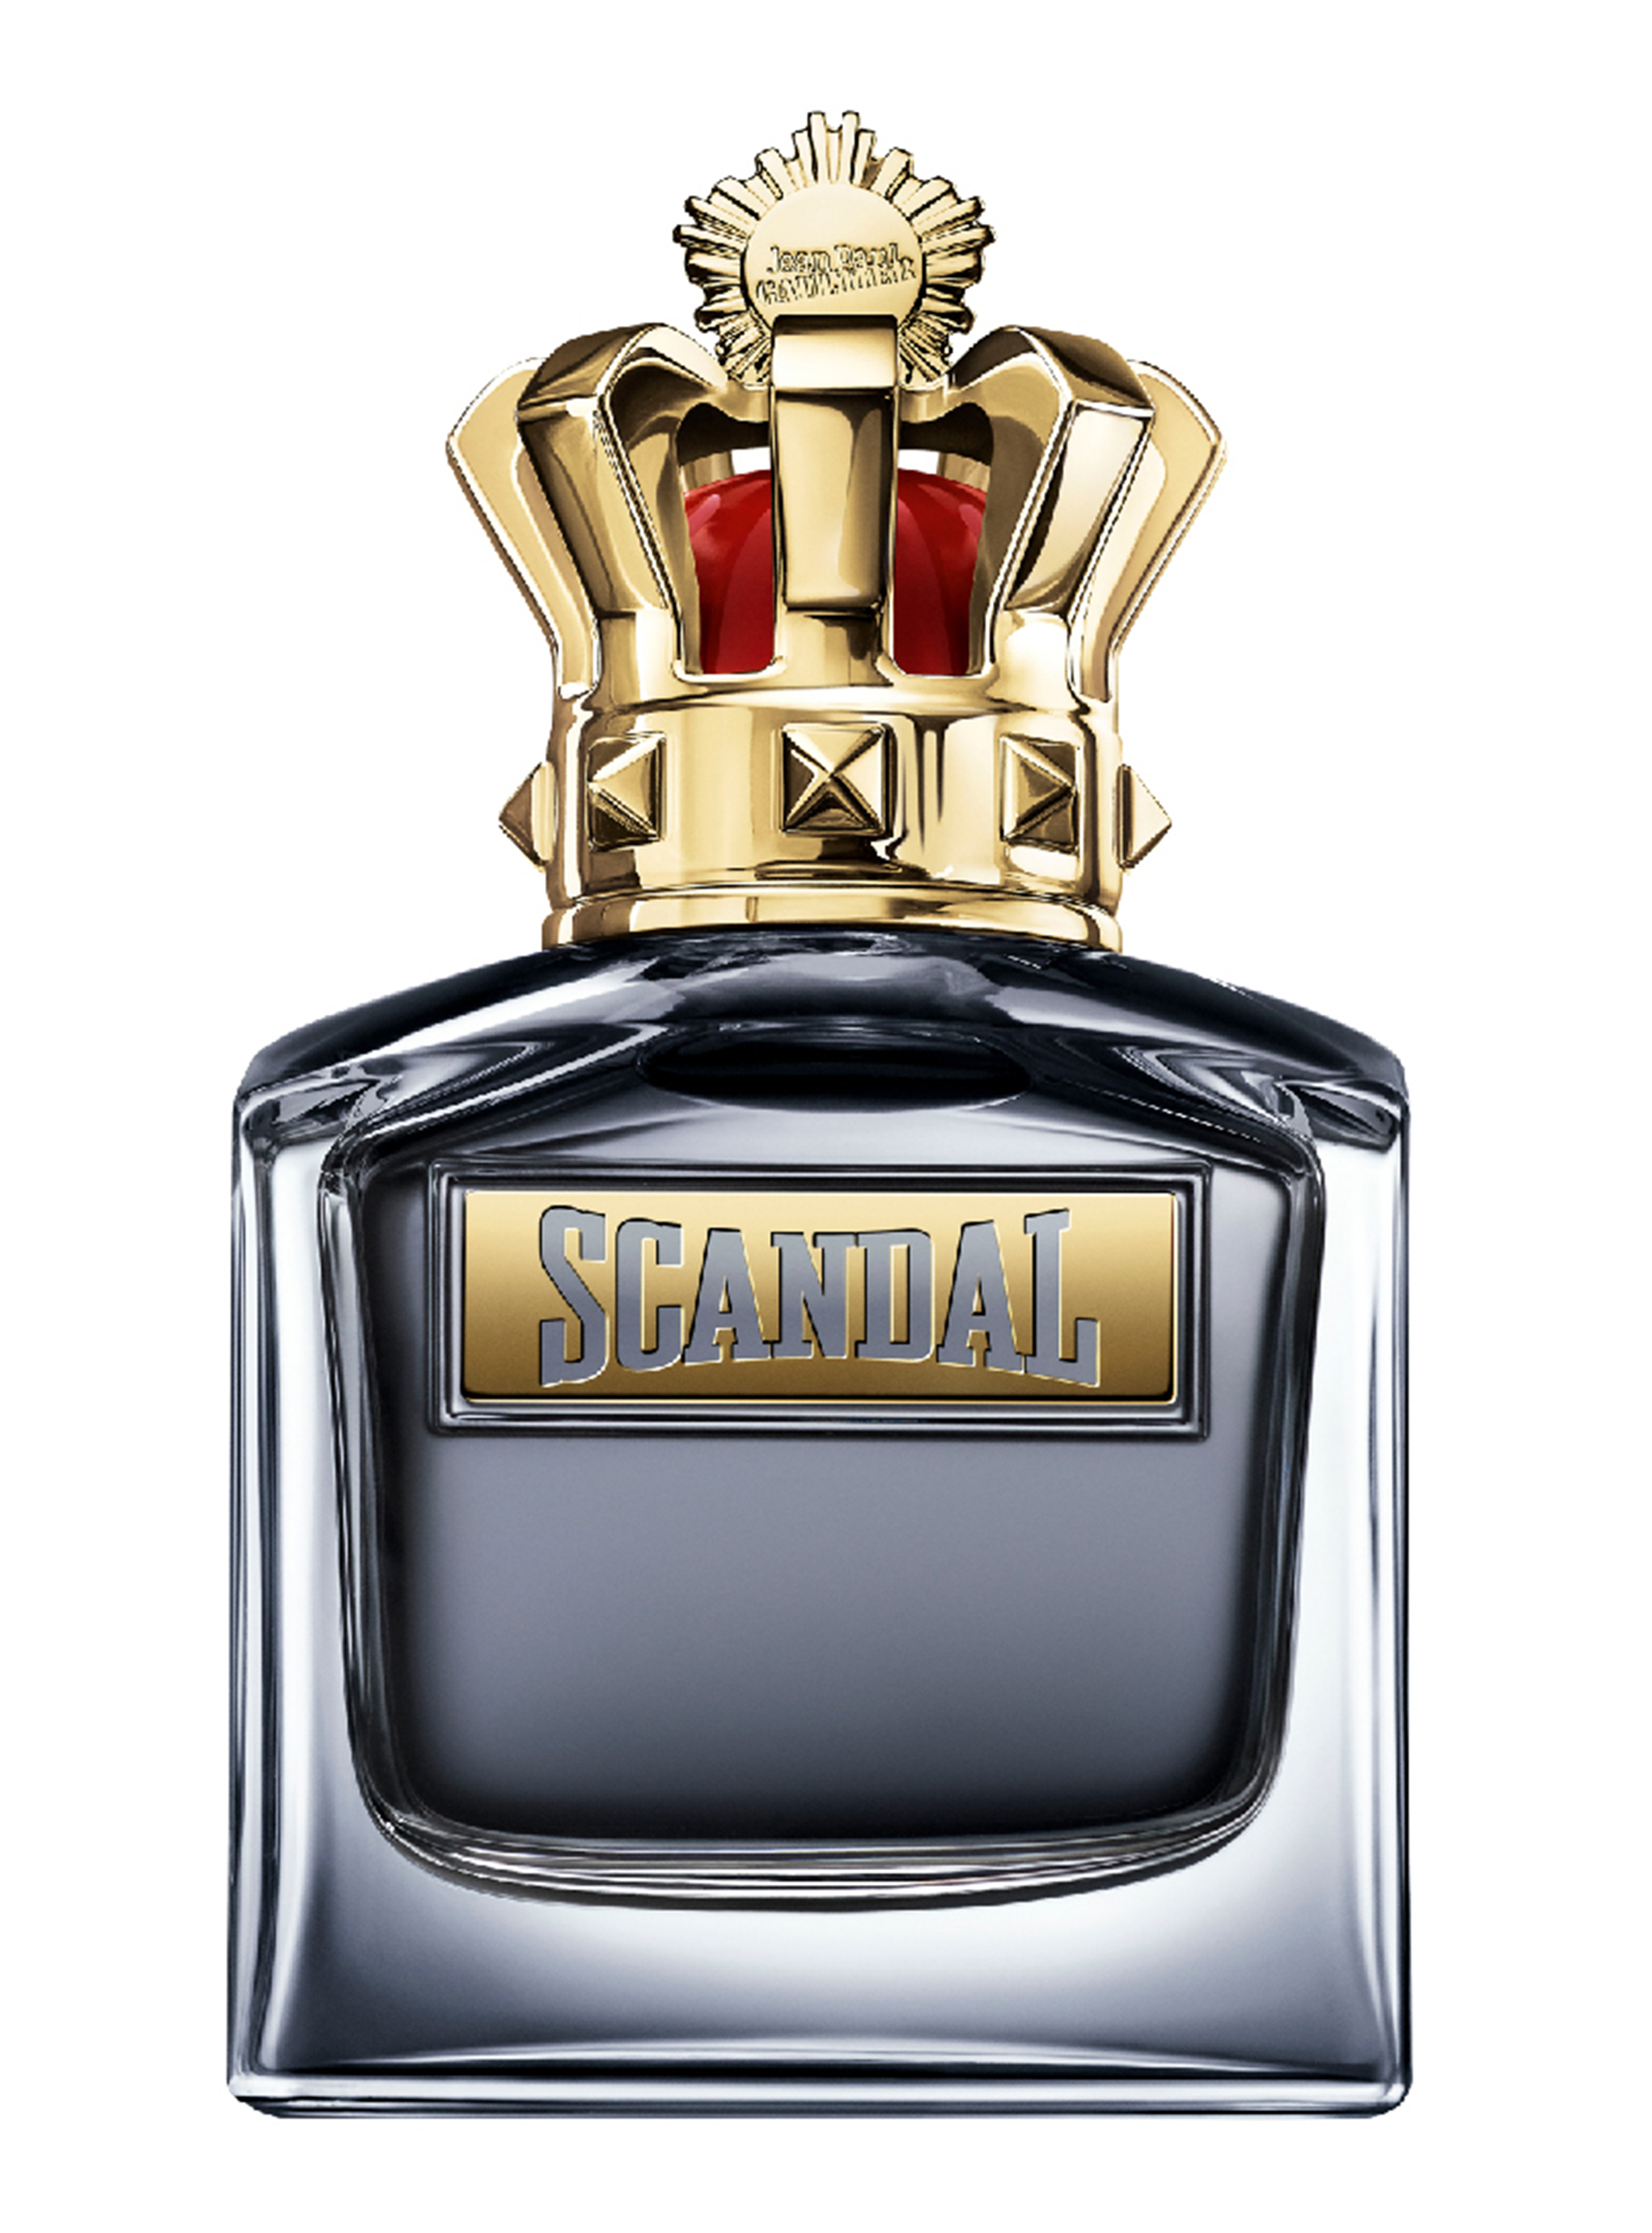 Perfume Jean Paul Gaultier Scandal Pour Homme For Him EDT 100 ml